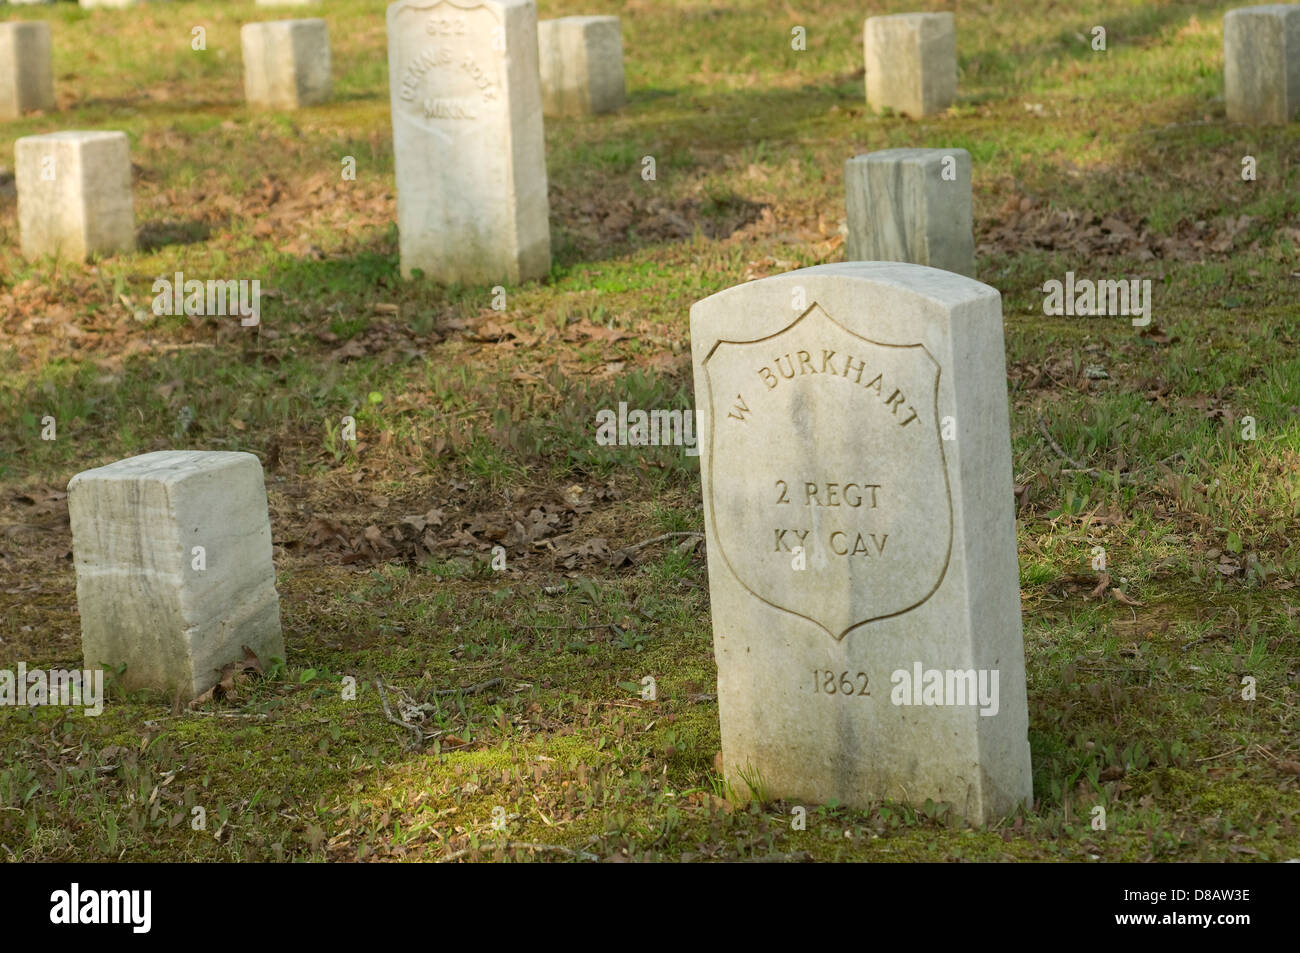 Kentucky cavalry soldier's headstone amid other Union graves, National Cemetery, Shiloh National Military Park, Tennessee. Digital photograph Stock Photo